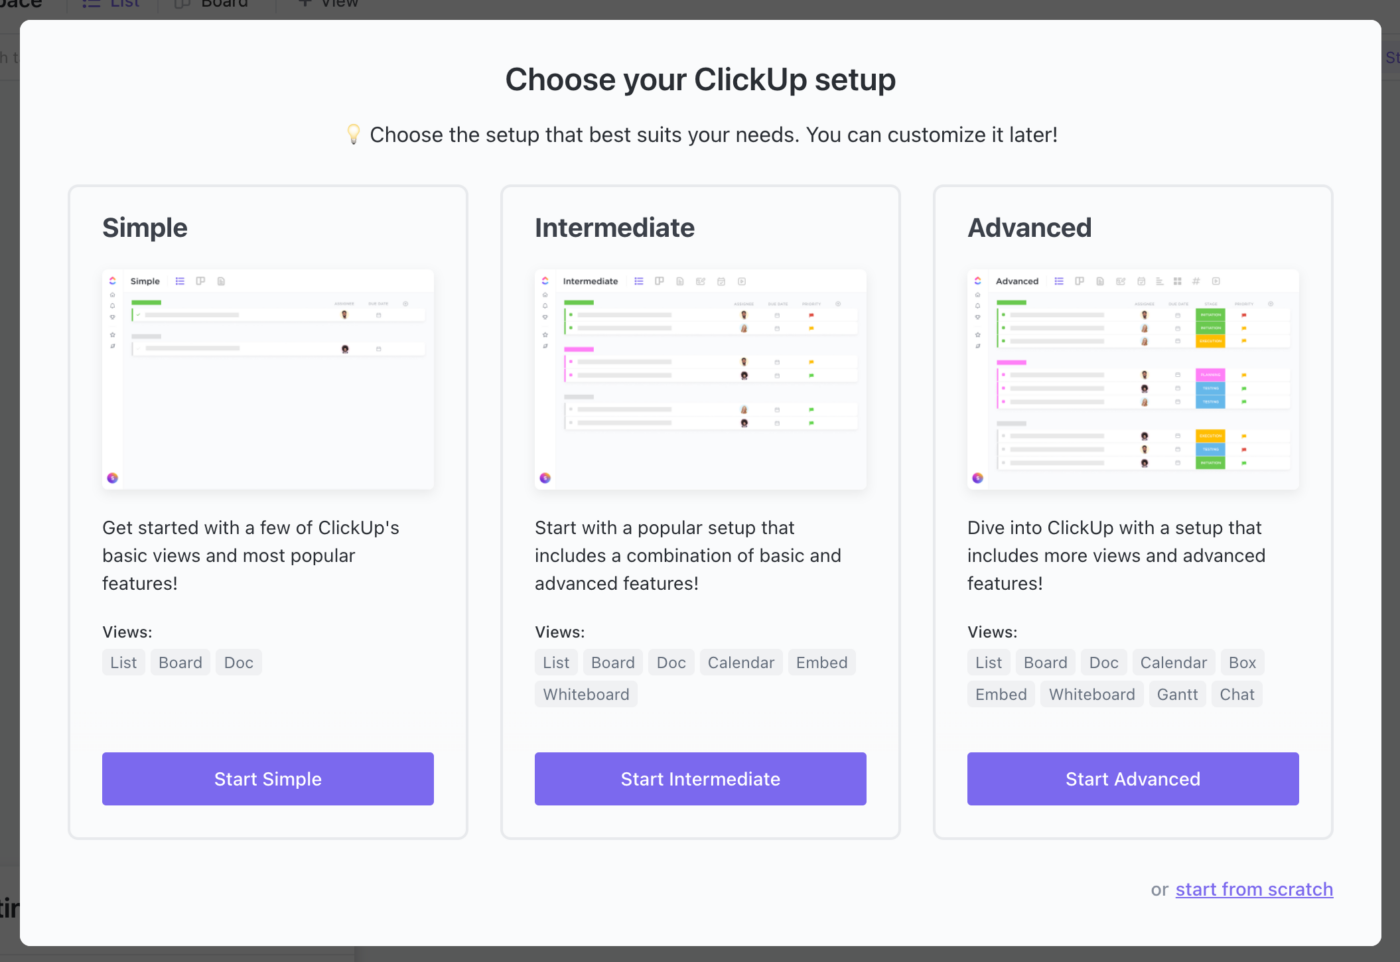 set up your ClickUp Hierarchy with simple, intermediate, or advanced features